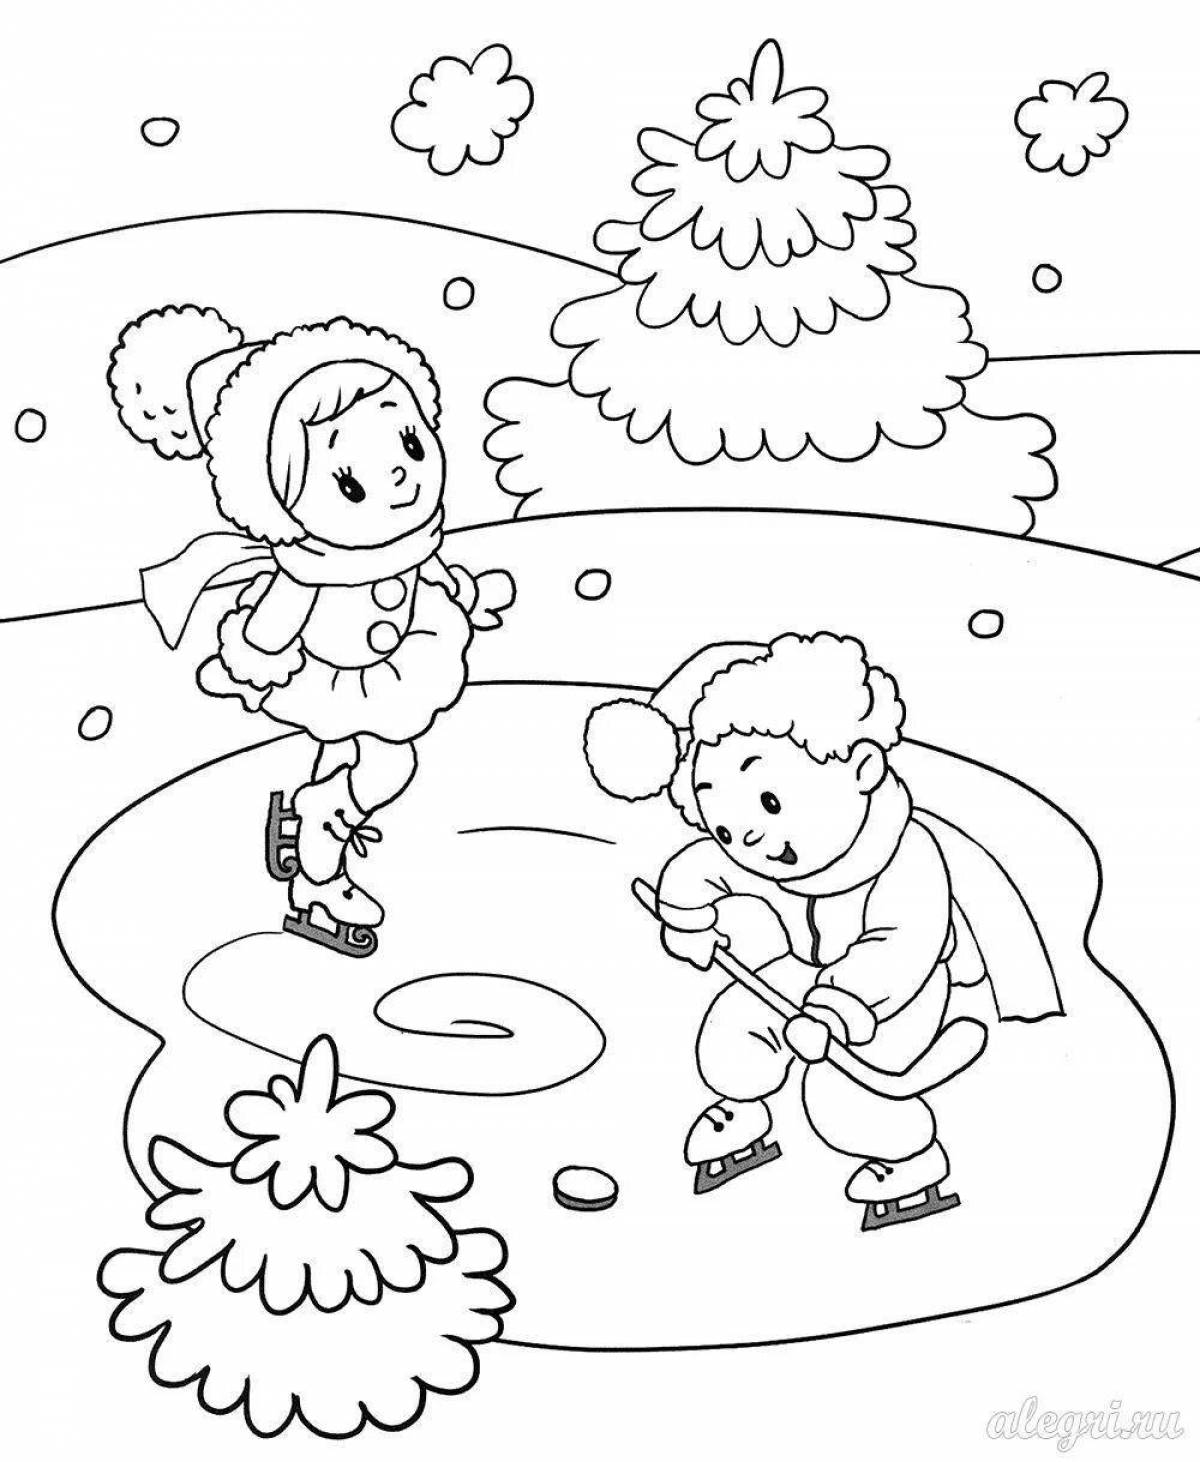 Exciting winter fun coloring book for kids